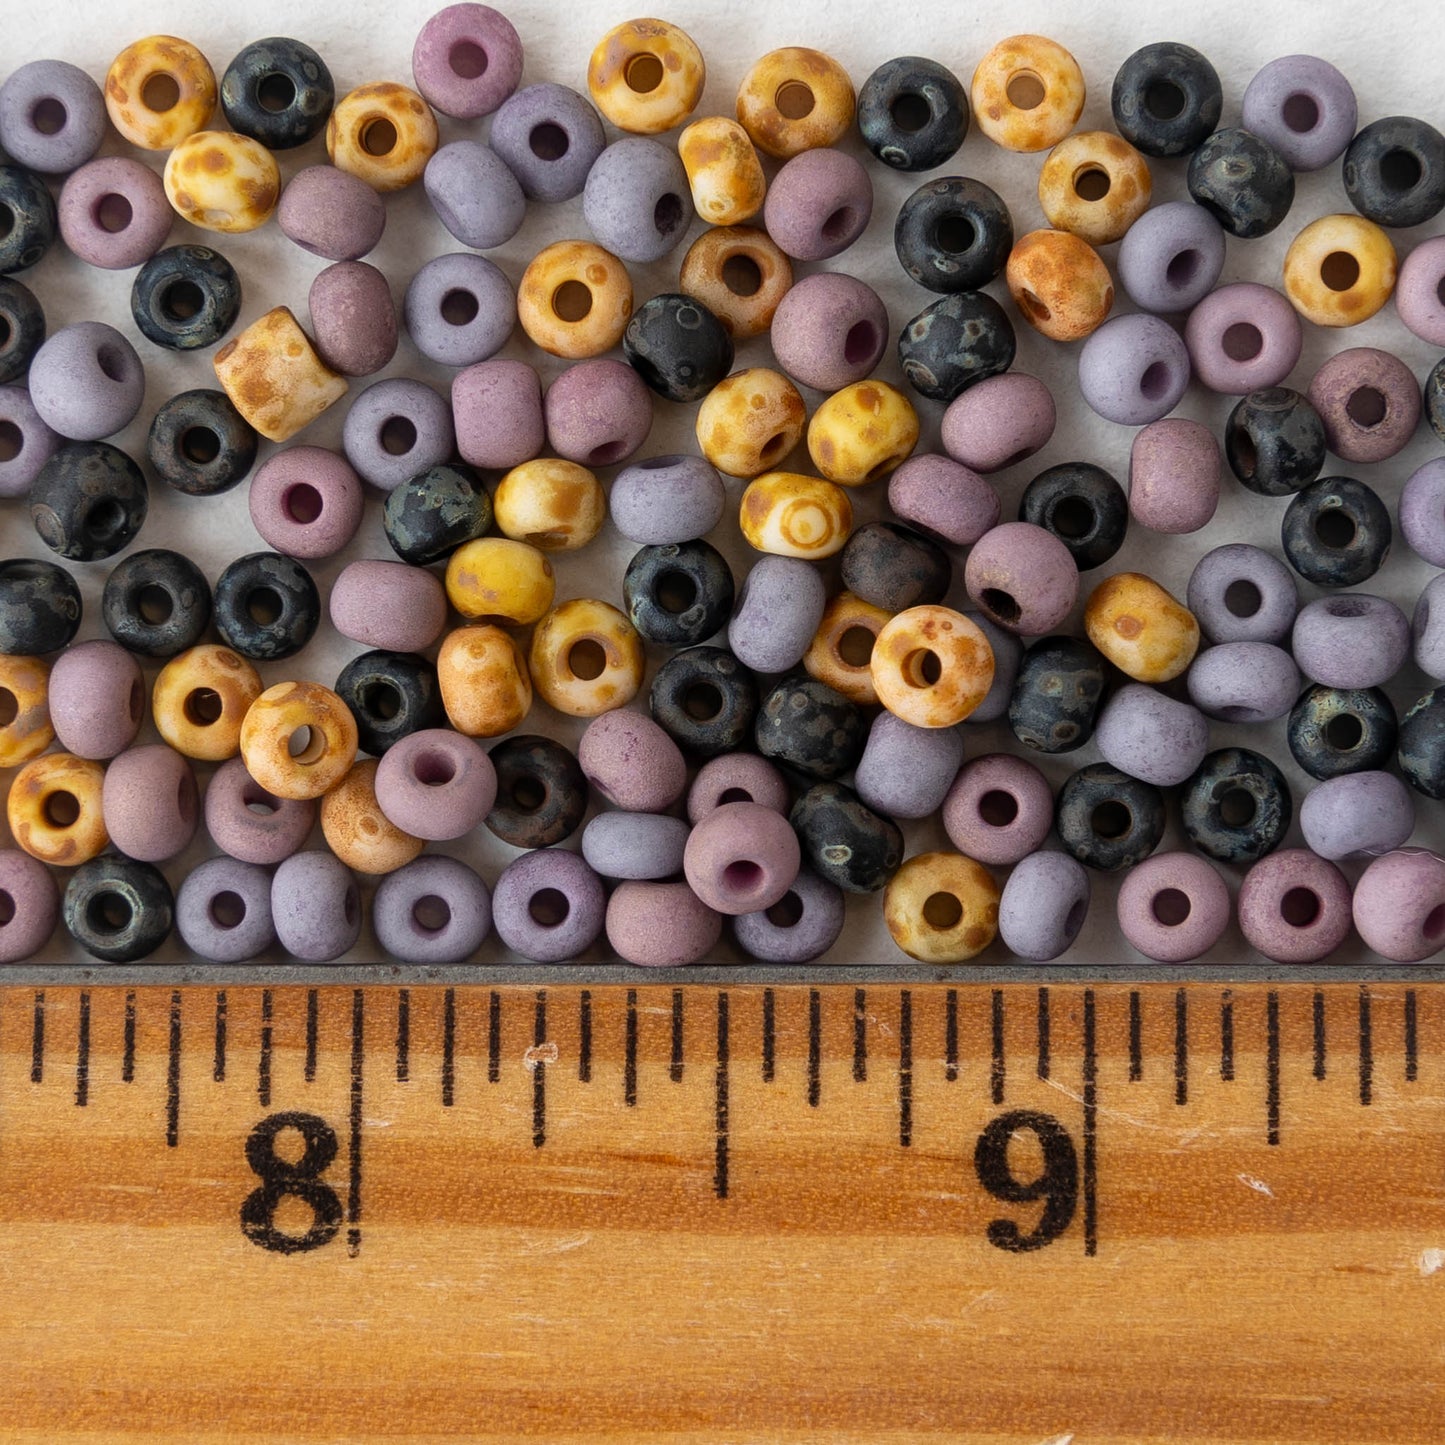 6 Aged Seed Bead Mix - Matte Lavender, Black and Ivory Picasso - 20 inches